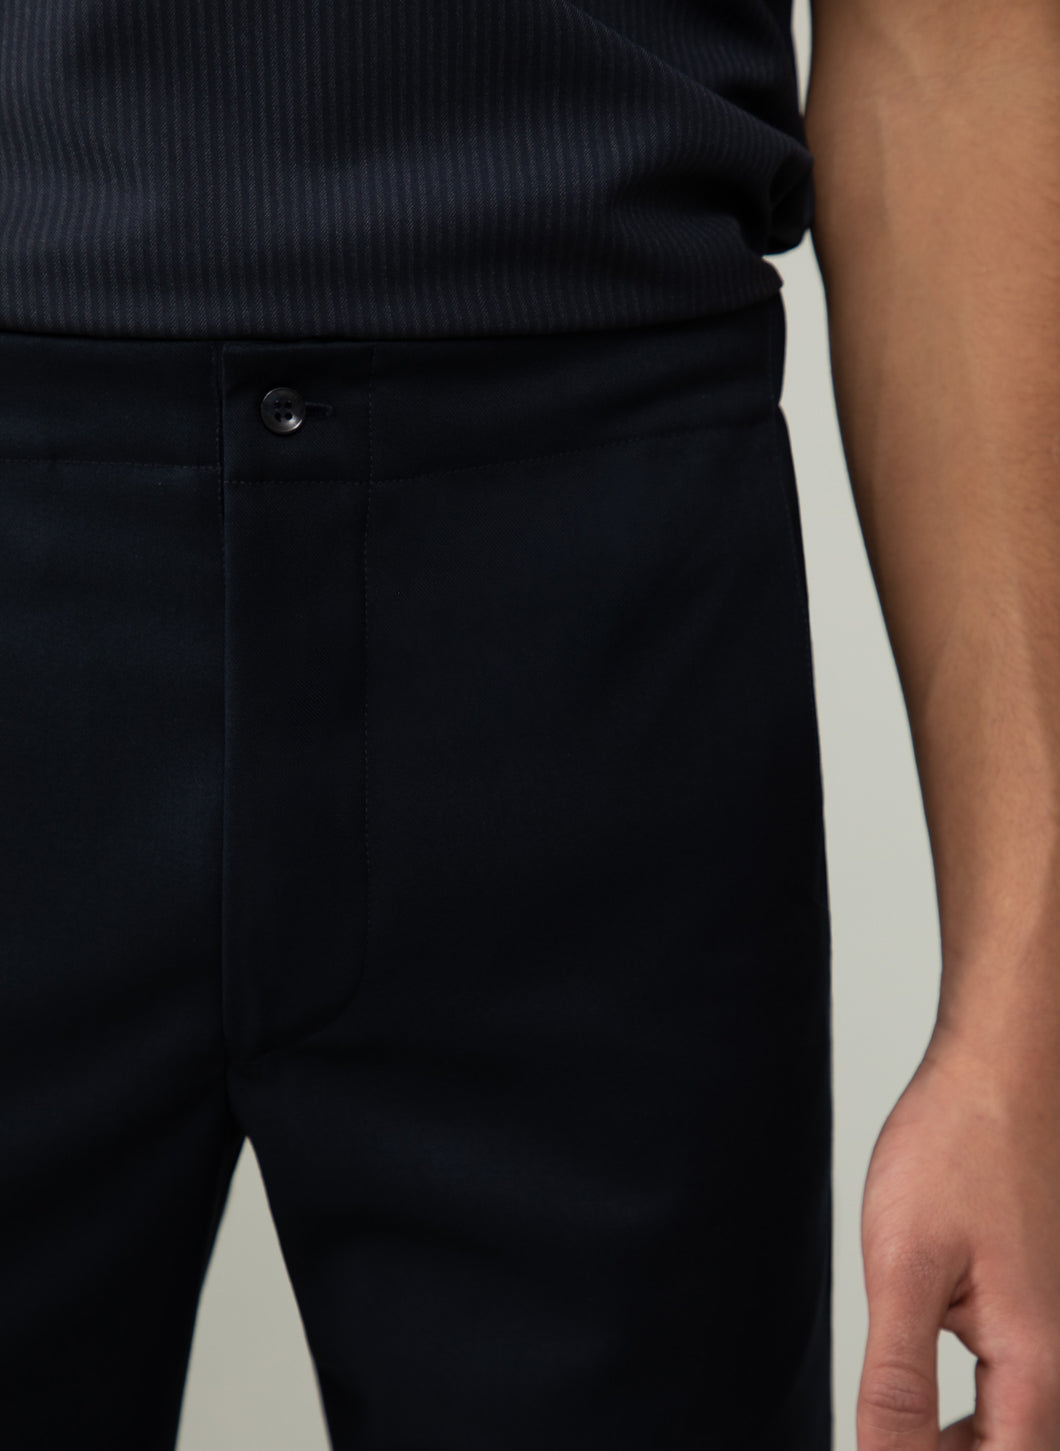 Pants with Notched Pockets in Navy Blue Serge Fabric